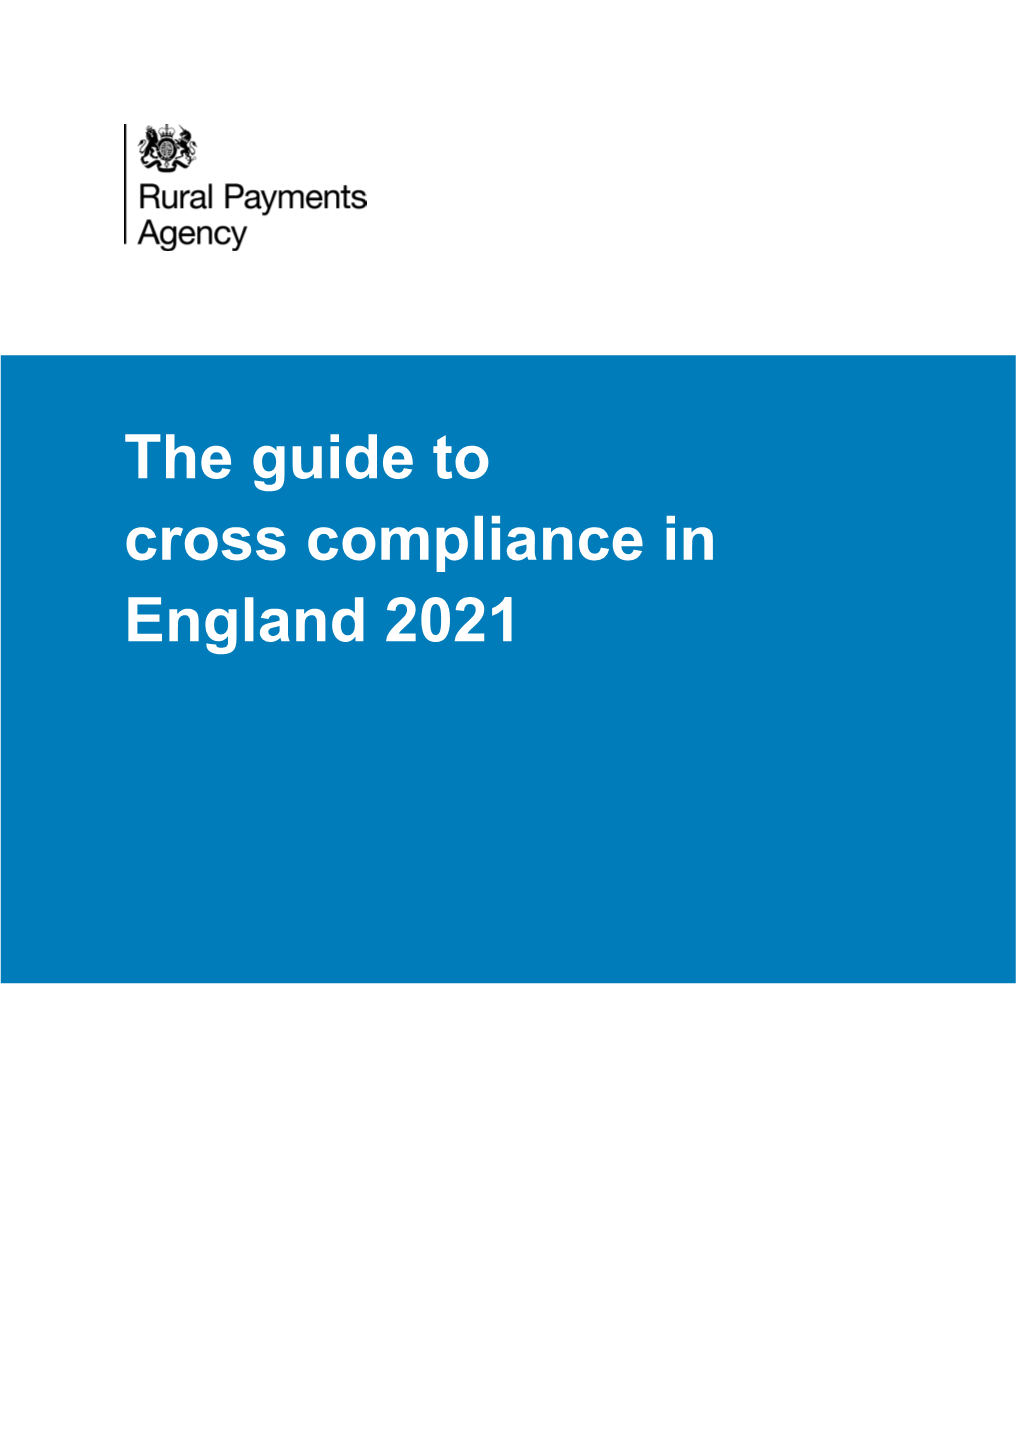 The Guide to Cross Compliance in England 2021